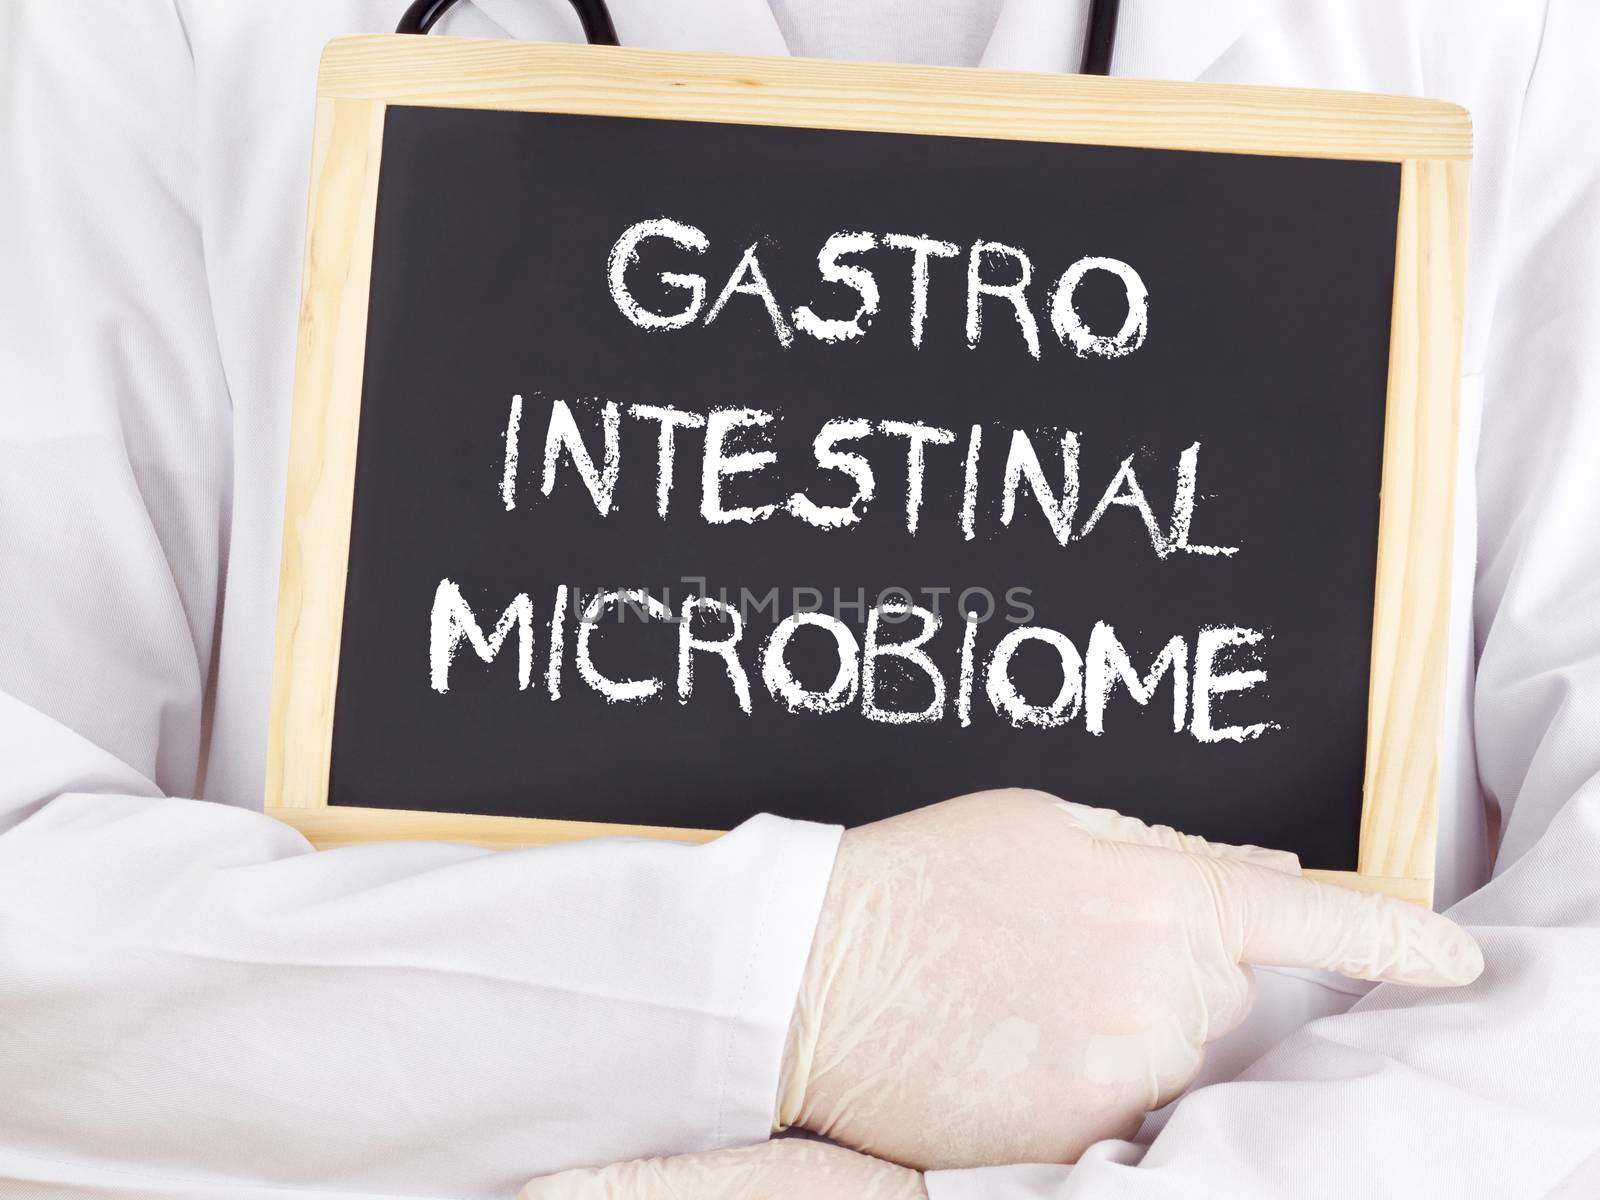 Doctor shows information: gastrointestinal microbiome